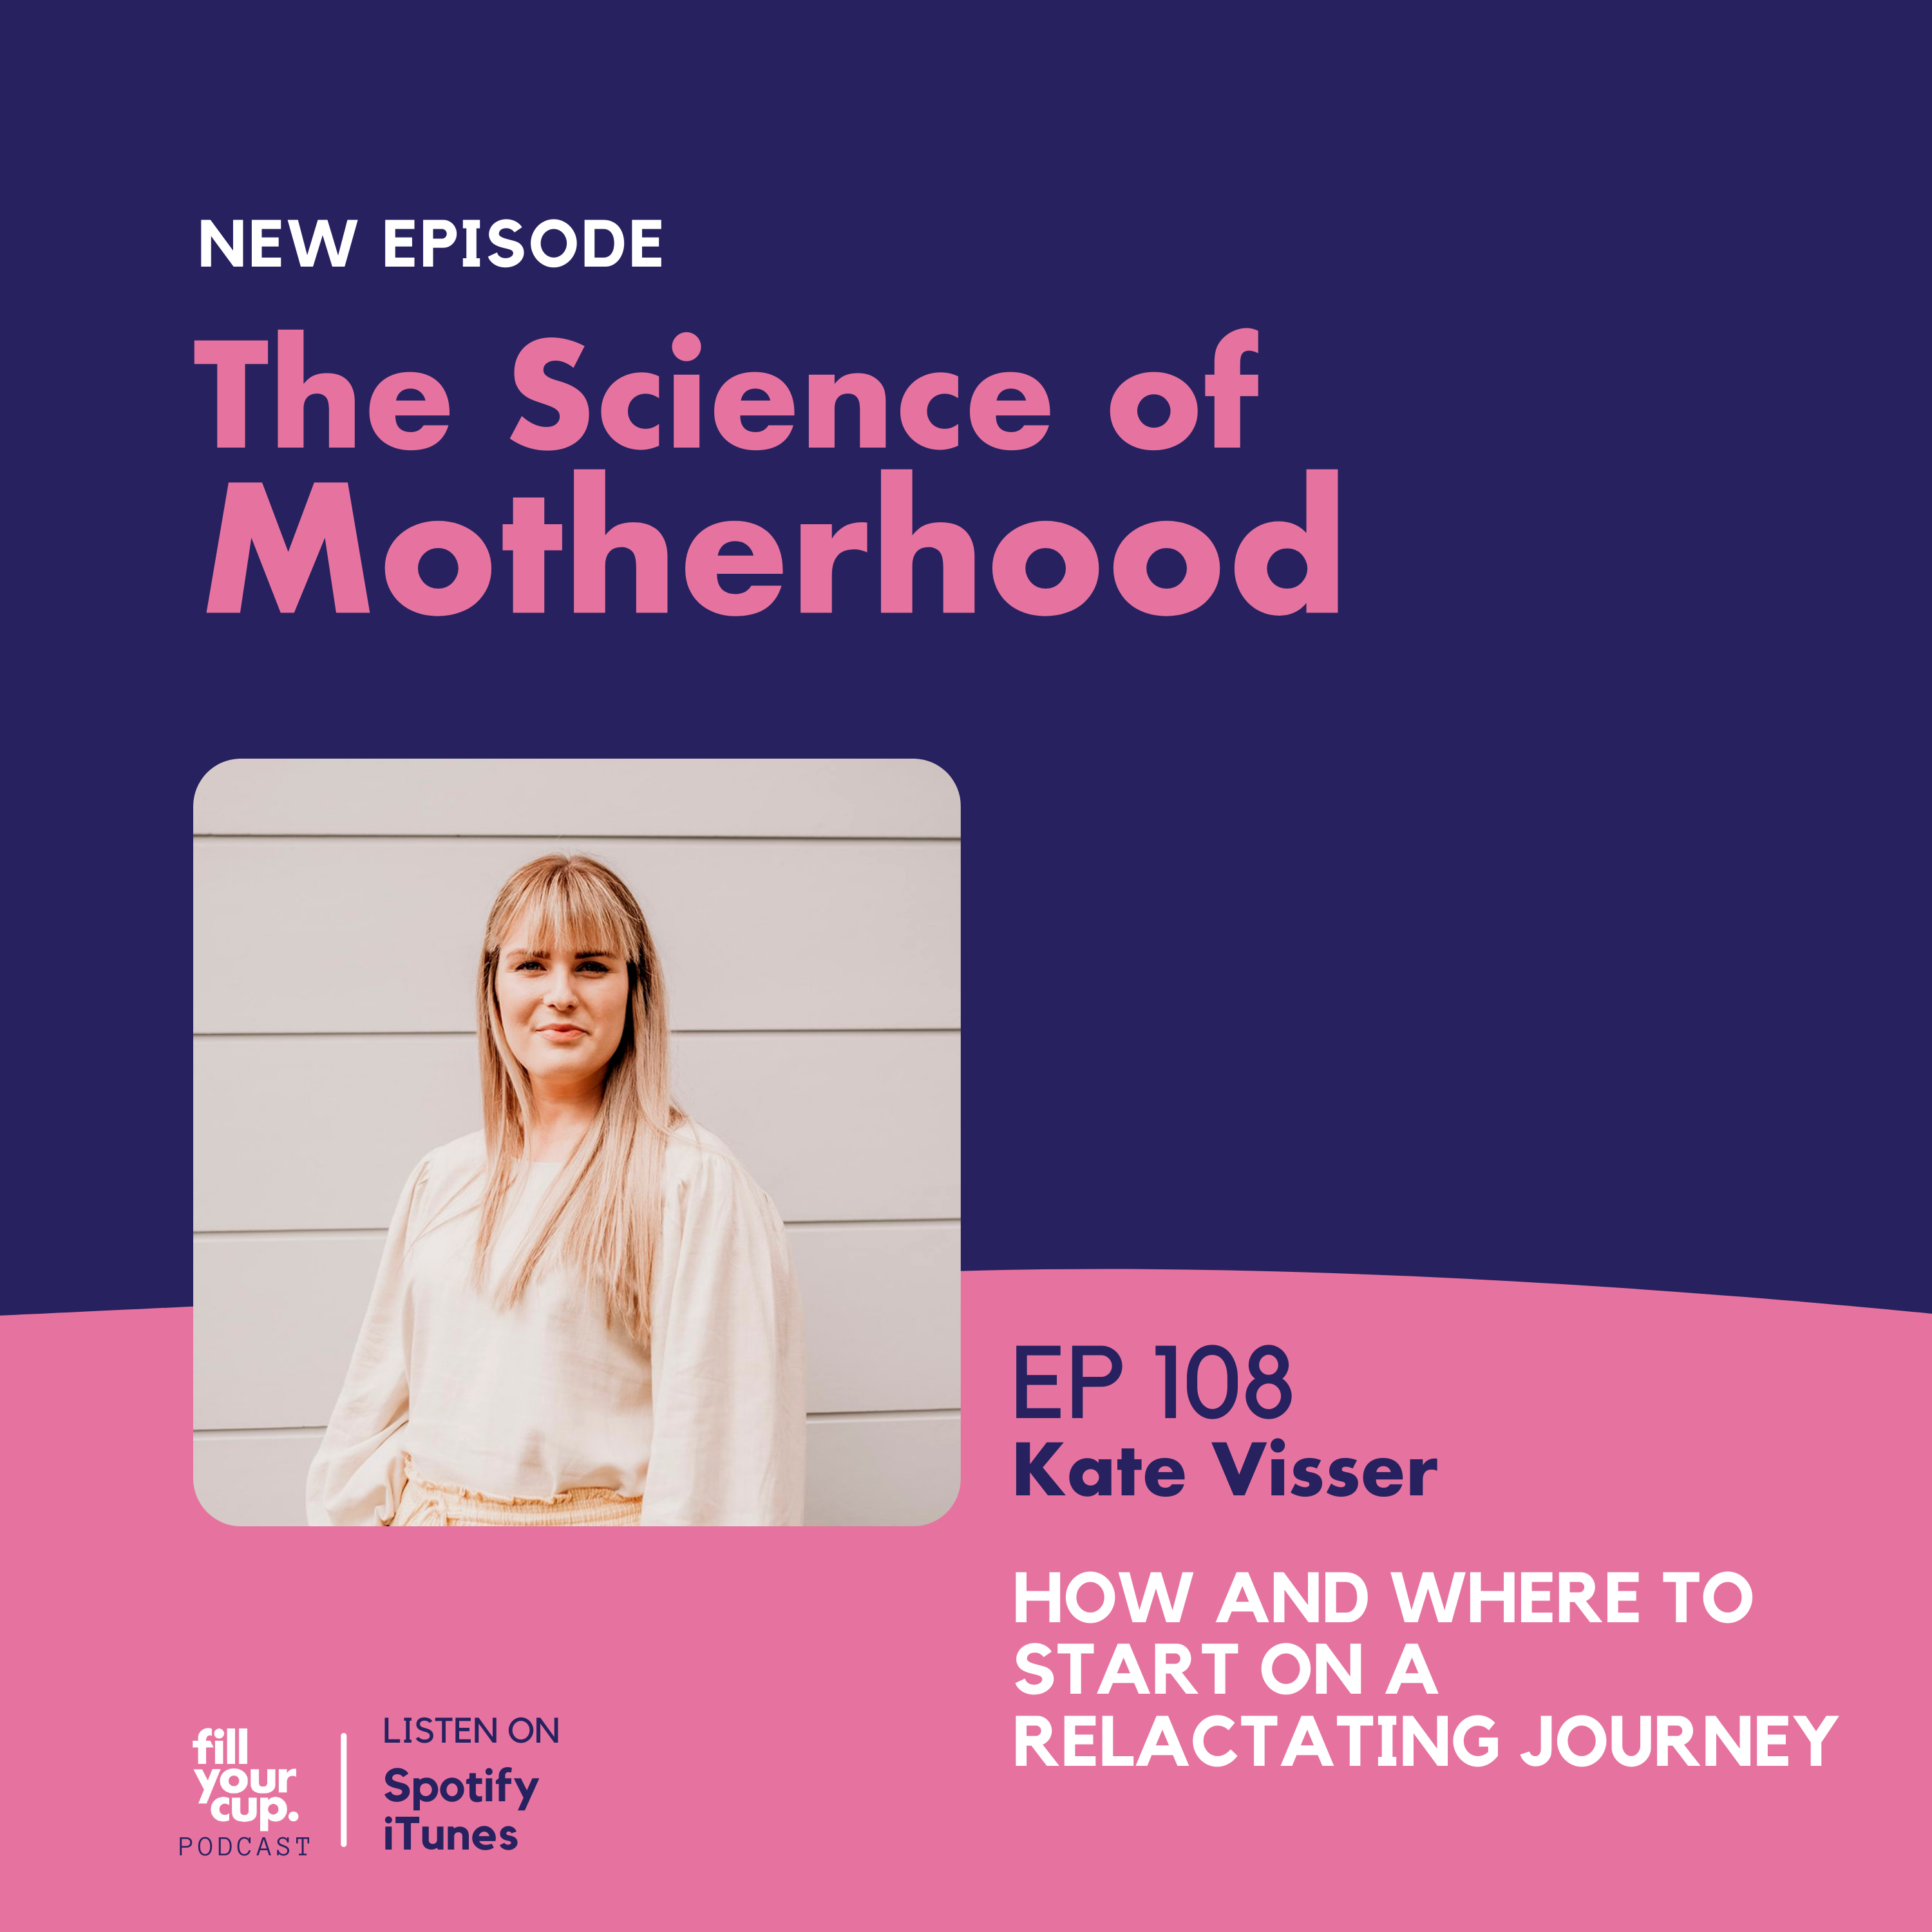 Ep 108. Kate Visser - How and where to start on a relactating journey